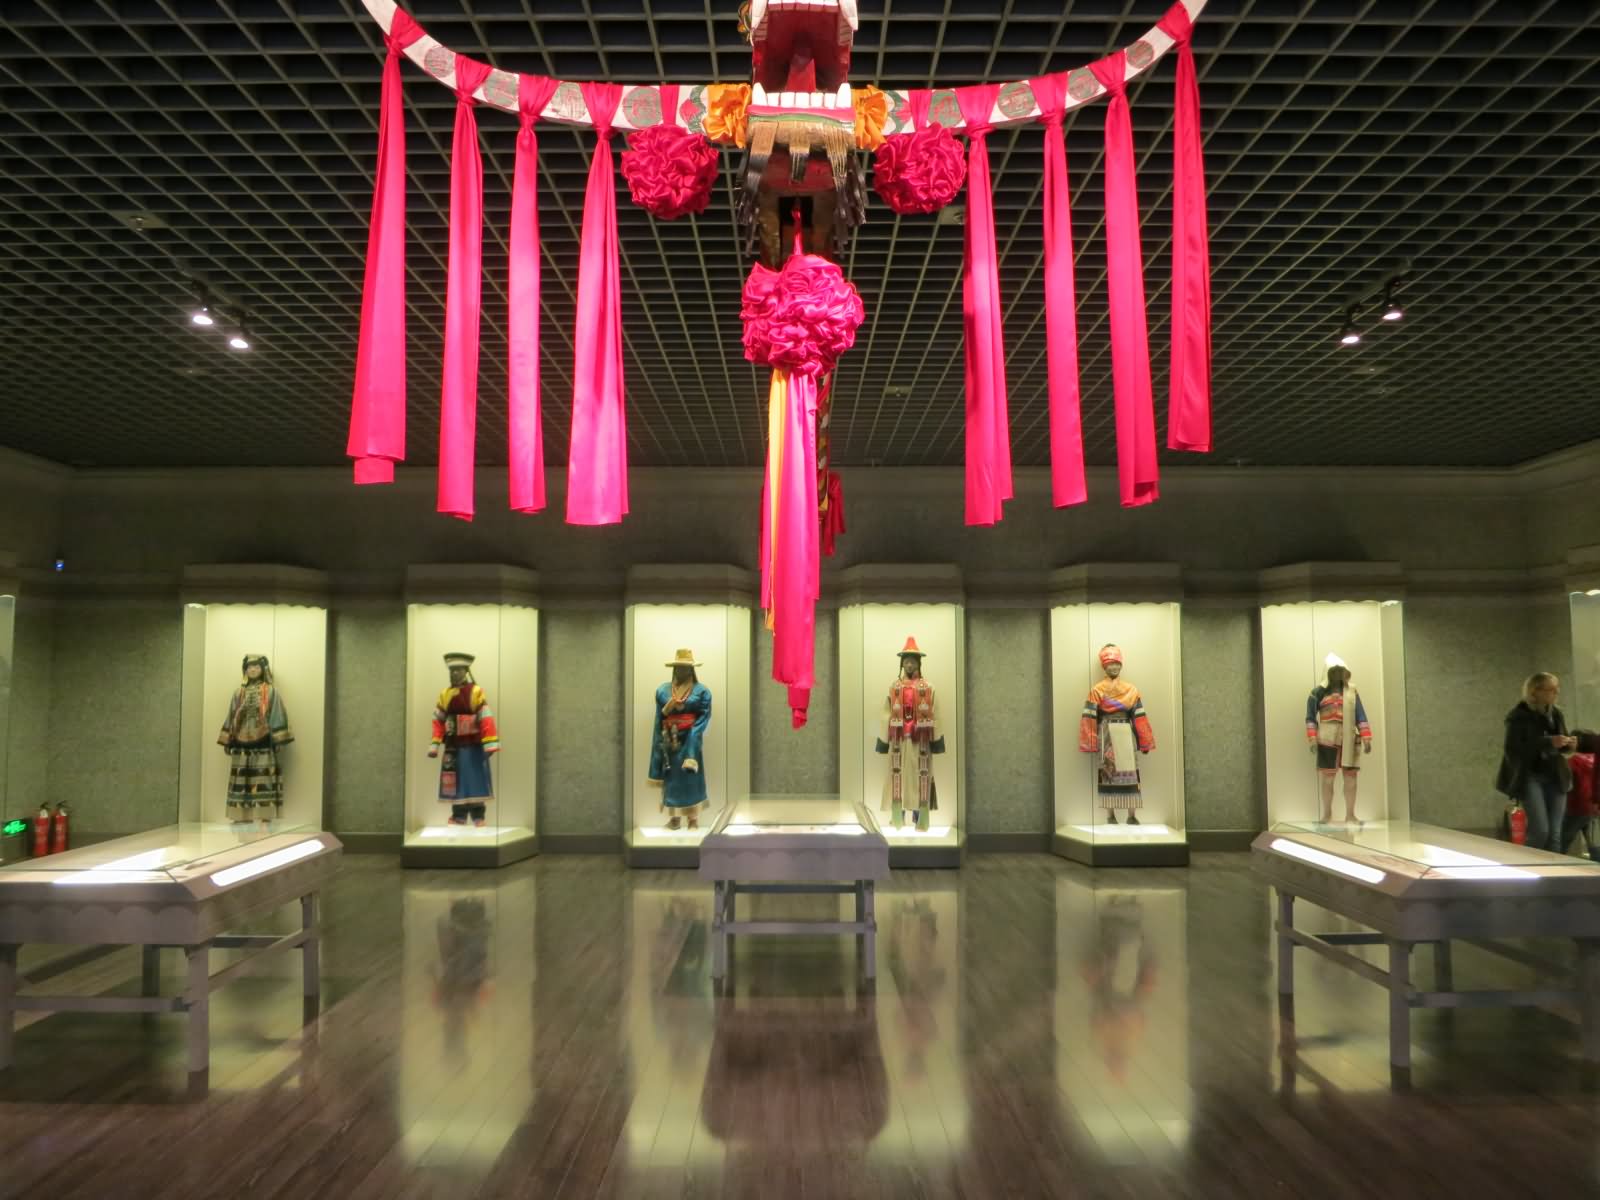 17 Incredible Inside View Images And Photos Of Shanghai Museum